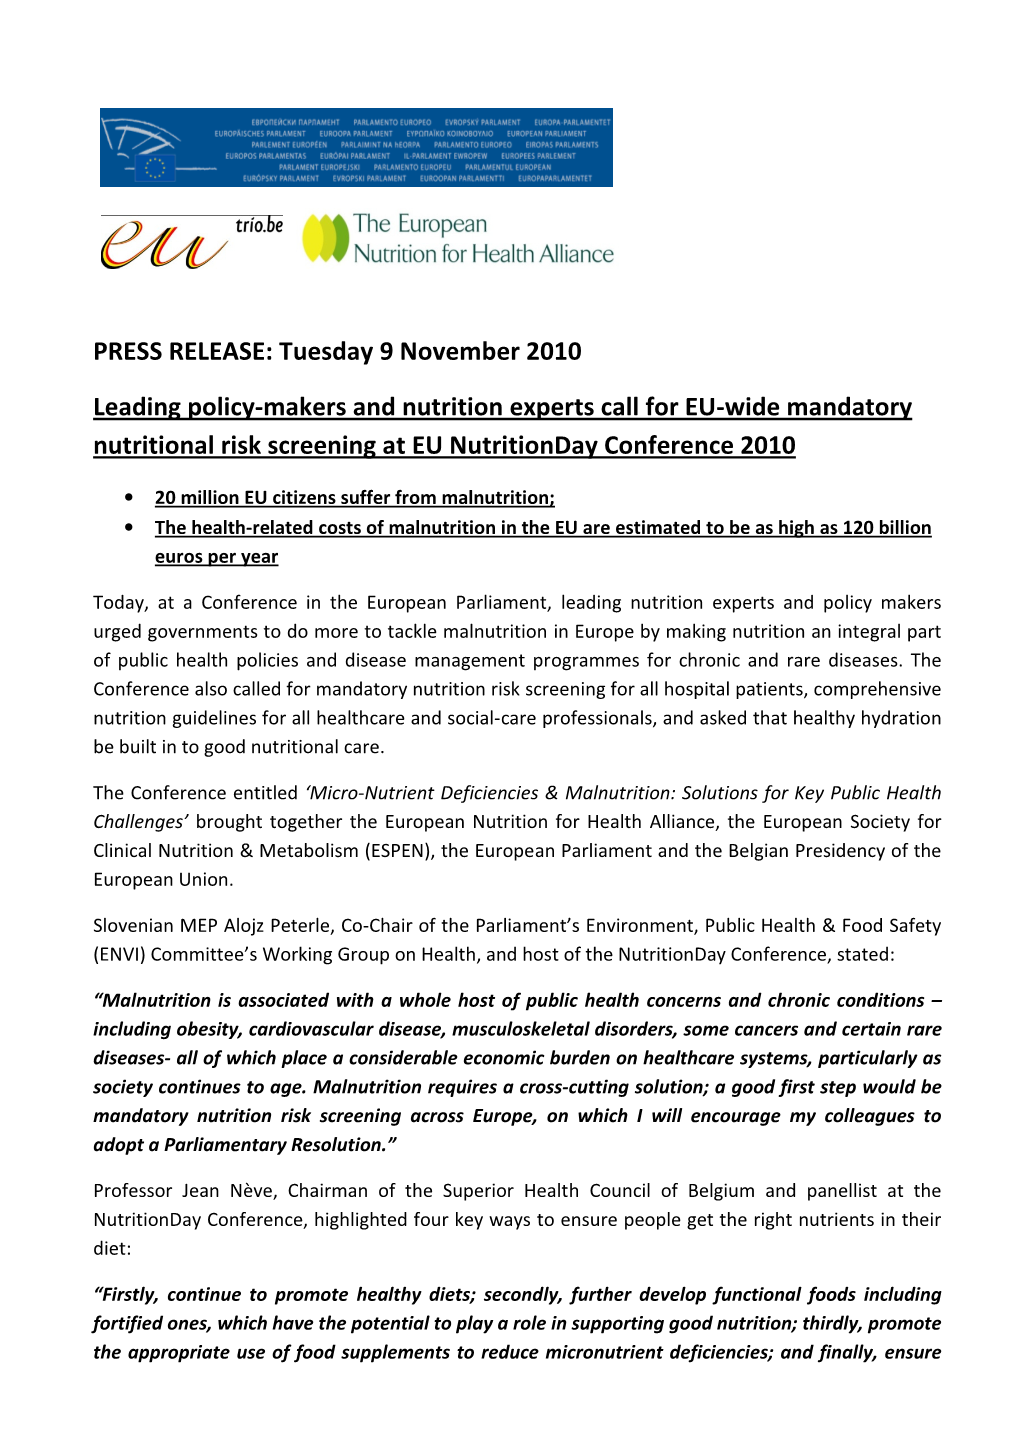 PRESS RELEASE: Tuesday 9 November 2010 Leading Policy